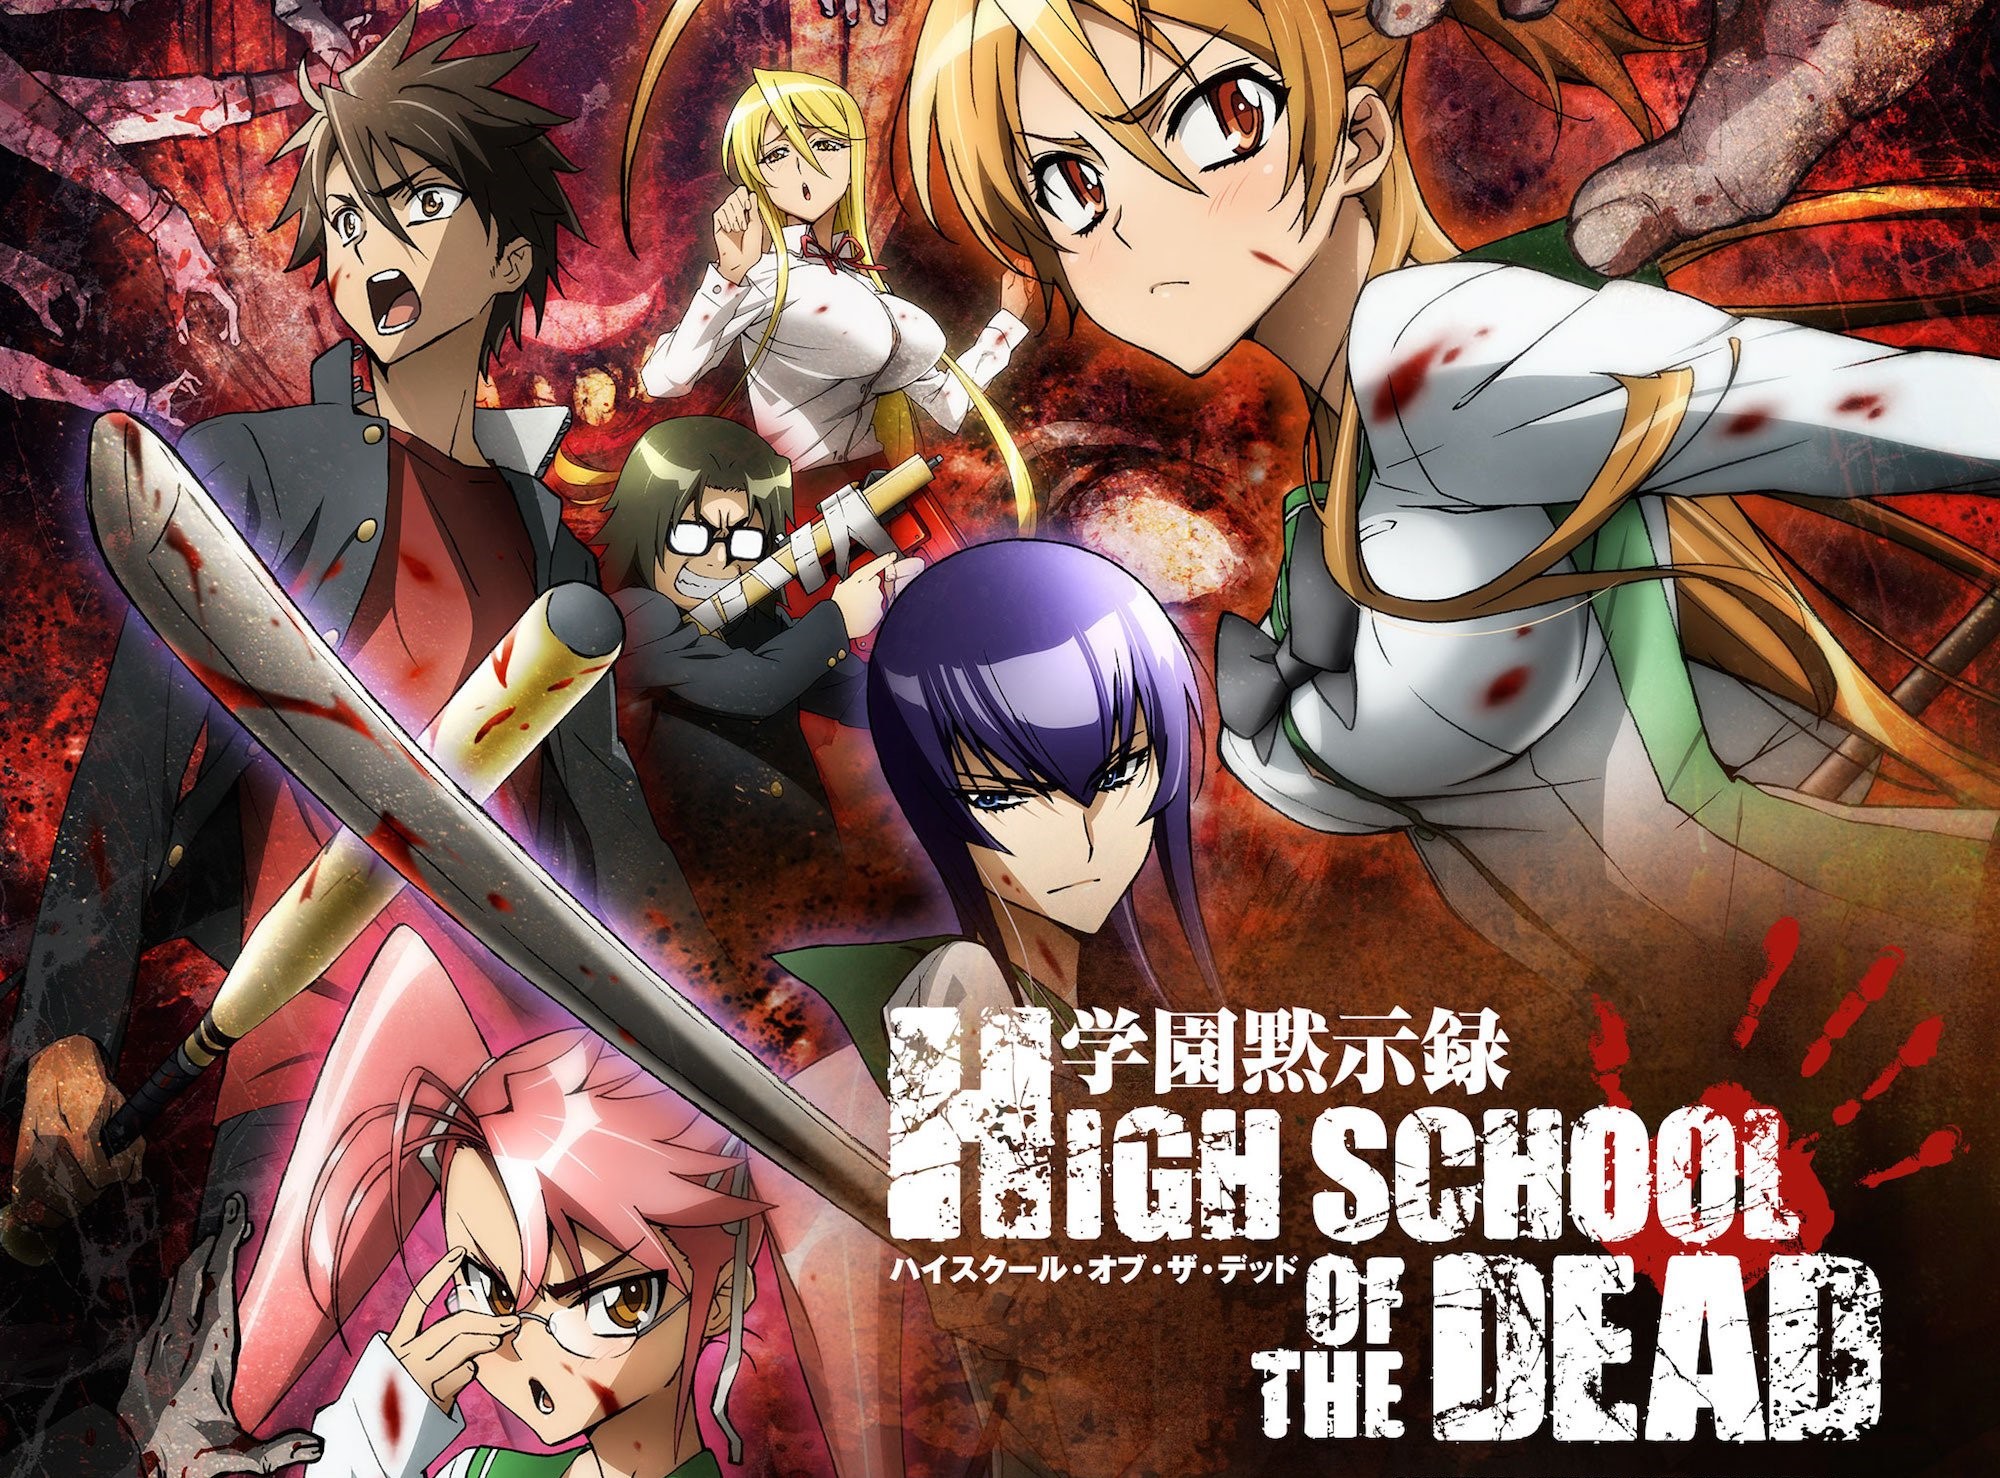 Highschool of the Dead (Introduction) - A Killer Opening! - The Otaku Author